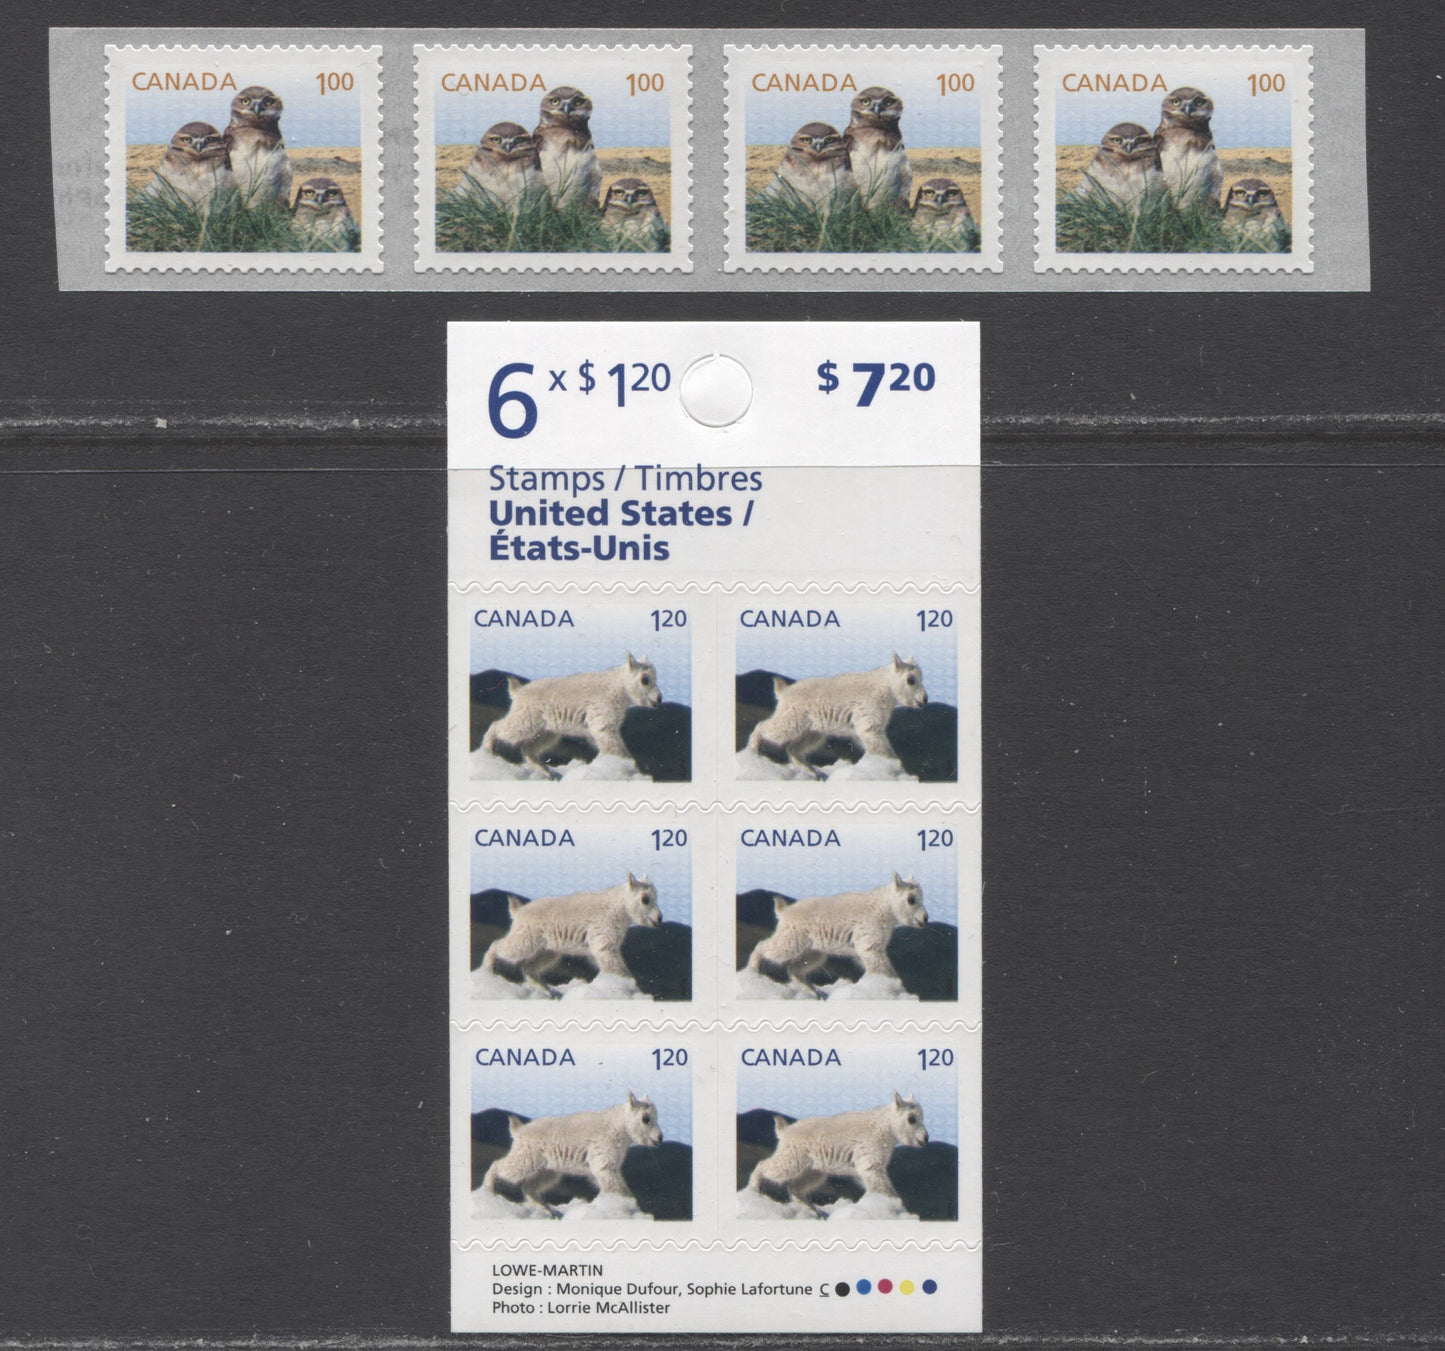 Lot 22 Canada #2710, 2715 $1.00 & $1.20 Multicolored Burrowing Owl & Mountain Goat, 2014 Baby Wildlife Definitives, A VFNH Coil Strip Of 4 & Booklet Of 6, Inscription On The Coil Strip